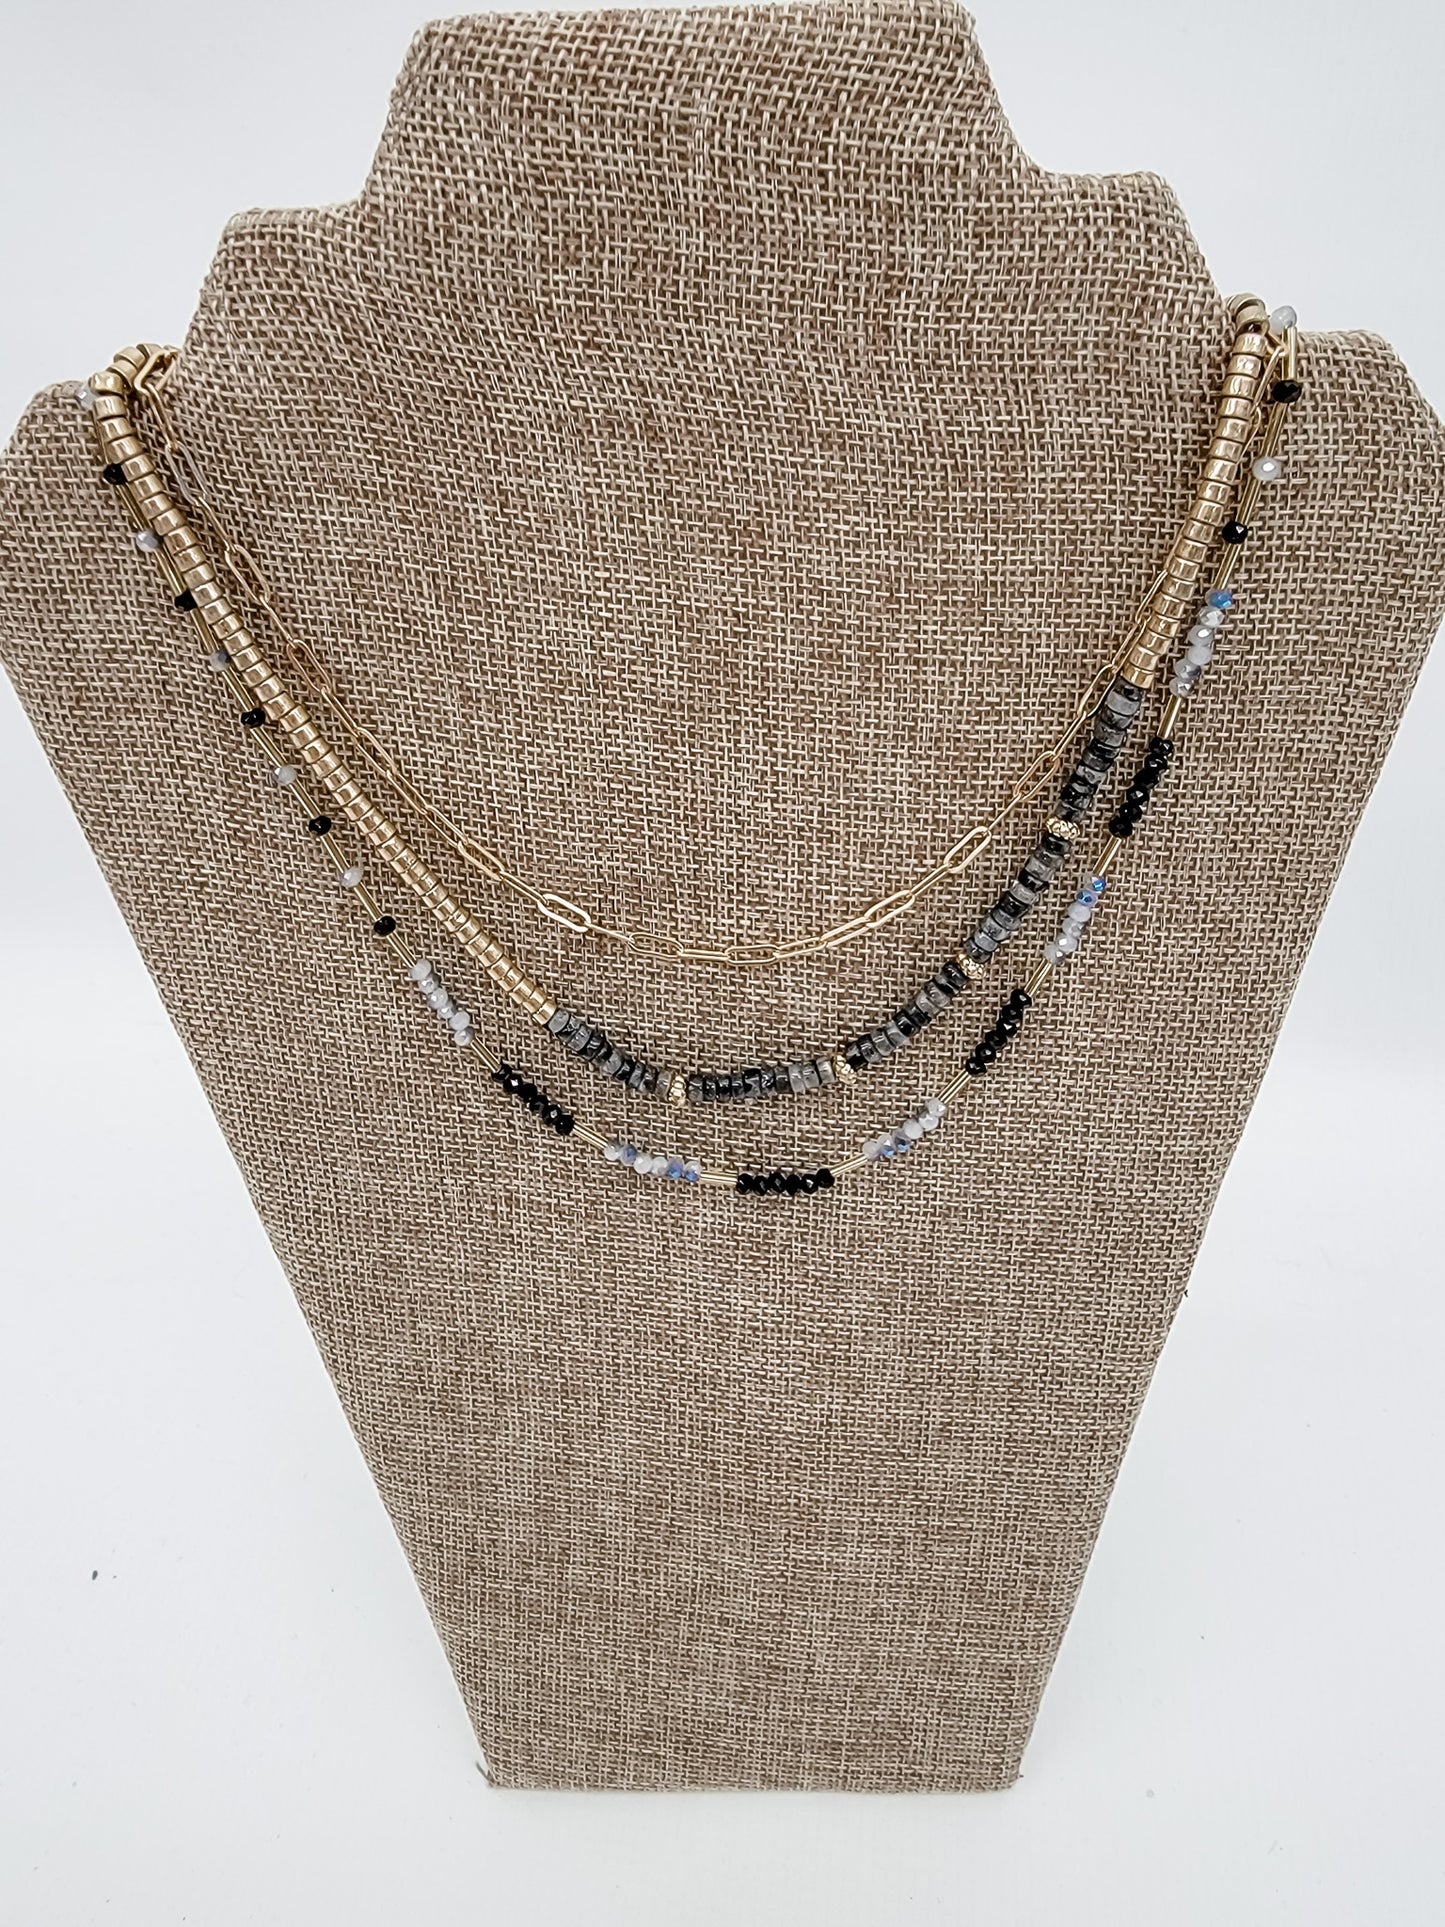 Black & Gold Multi-Chain Necklaces - Variety